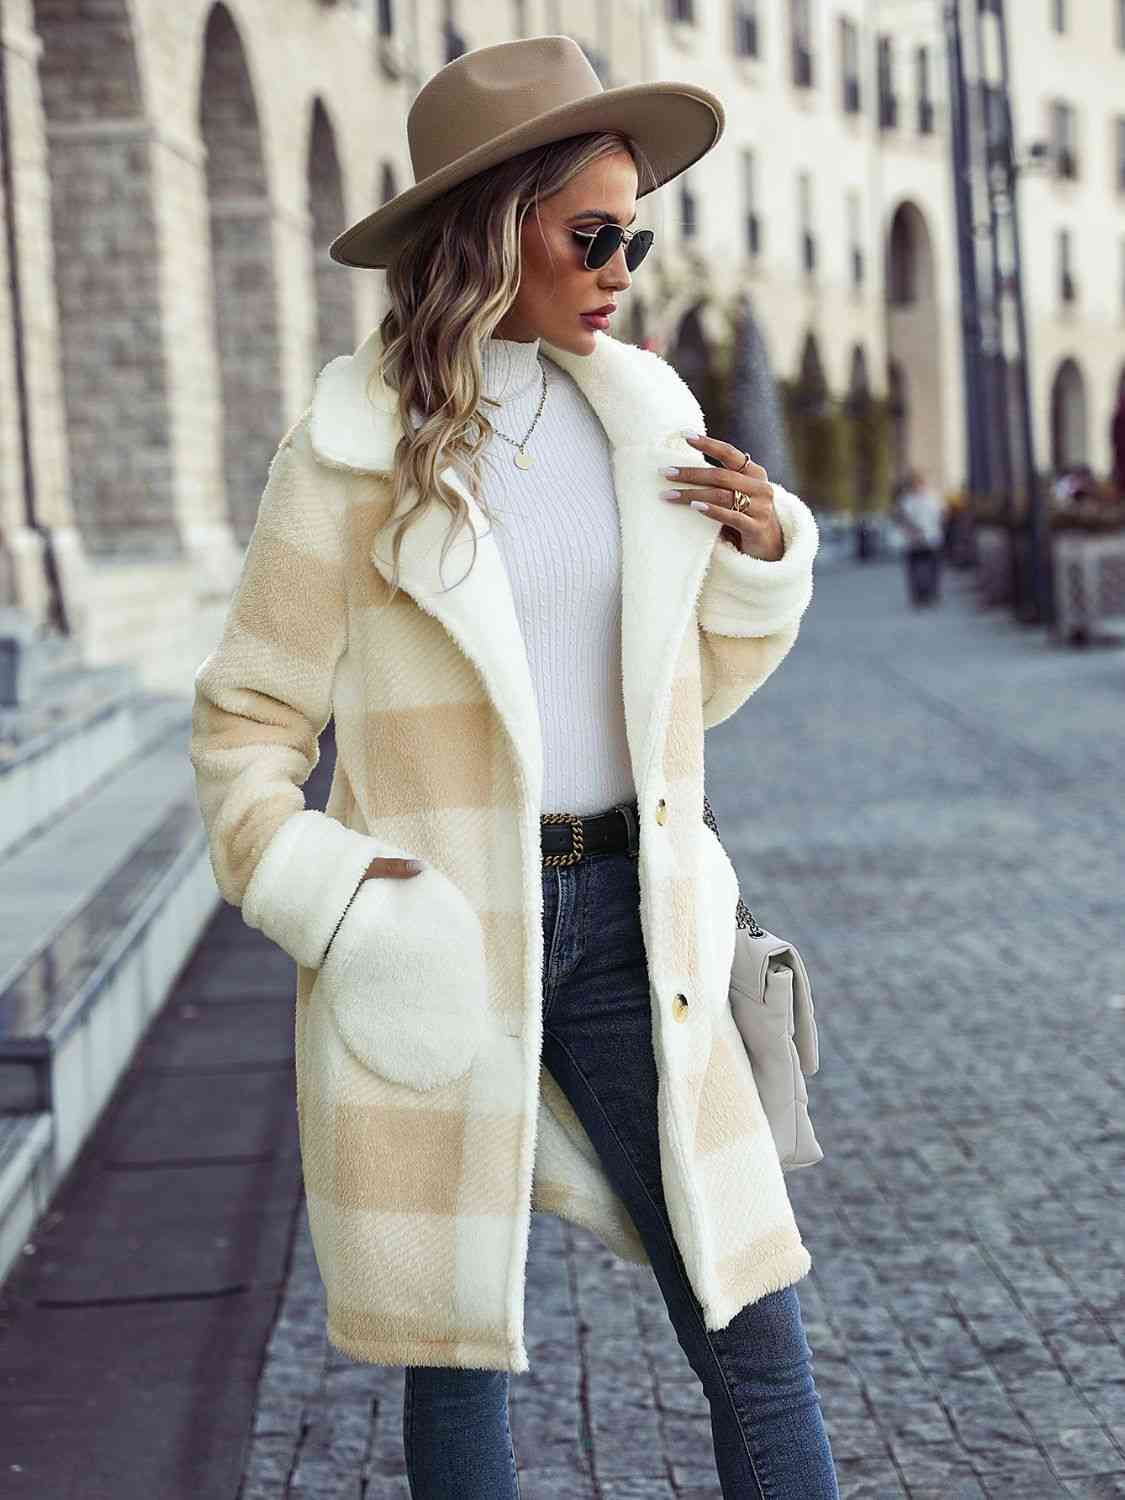 A plaid button coat, showcasing a timeless and fashionable pattern, secured with buttons for a stylish and warm winter look.